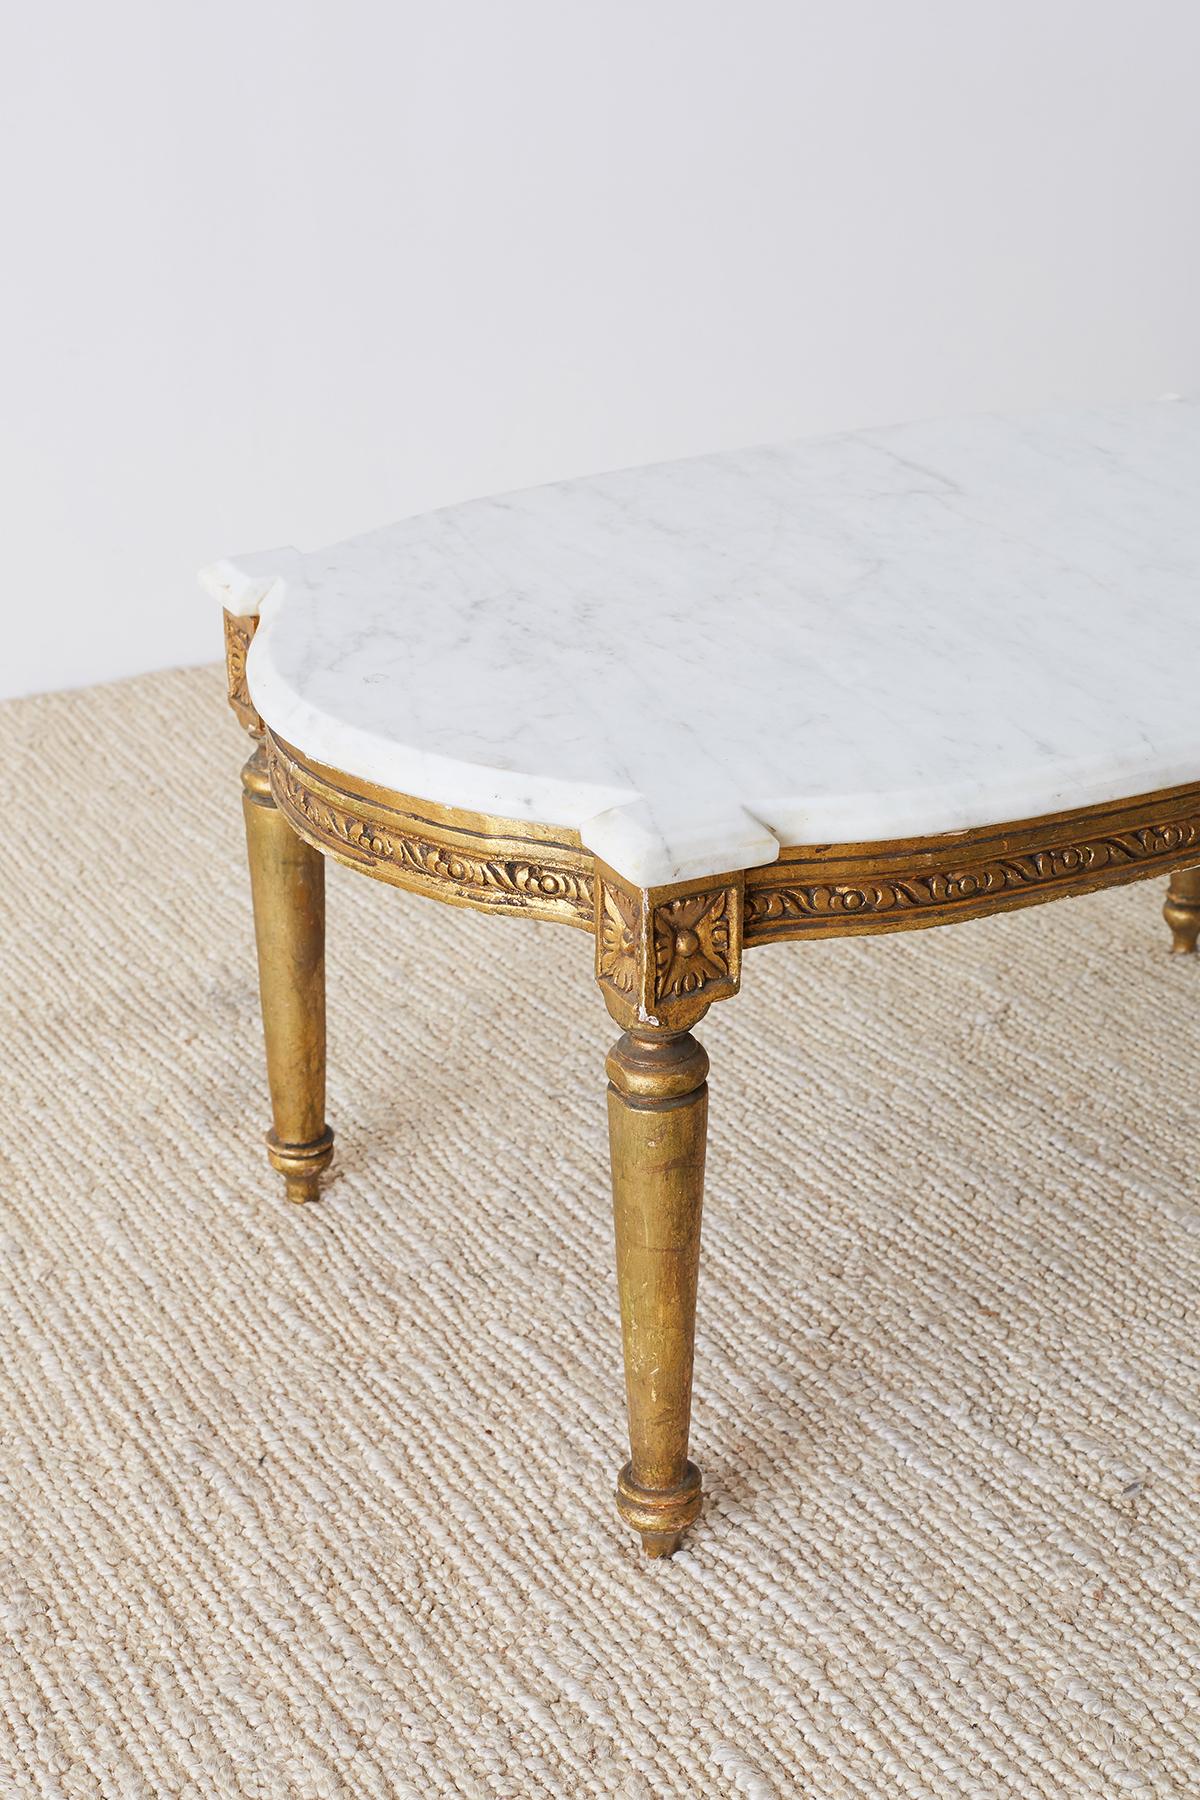 Hand-Crafted Louis XVI Style Neoclassical Marble Top Coffee Table